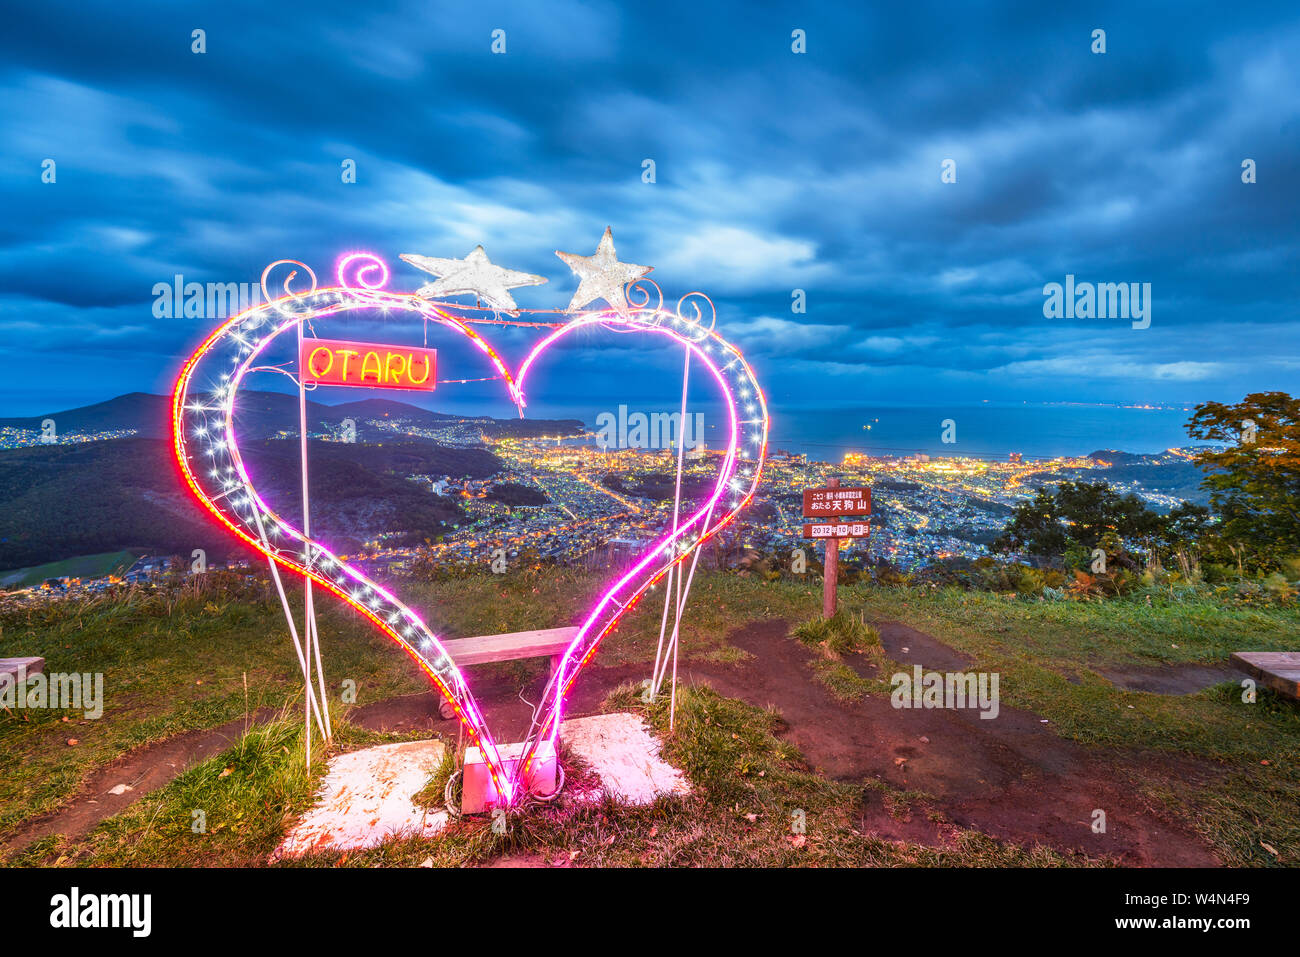 OTARU, JAPAN - OCTOBER 21, 2012: Heartshaped photo spot on Mt. Tengu at twilight. The mountain is reknown for the ropeway and view. Stock Photo